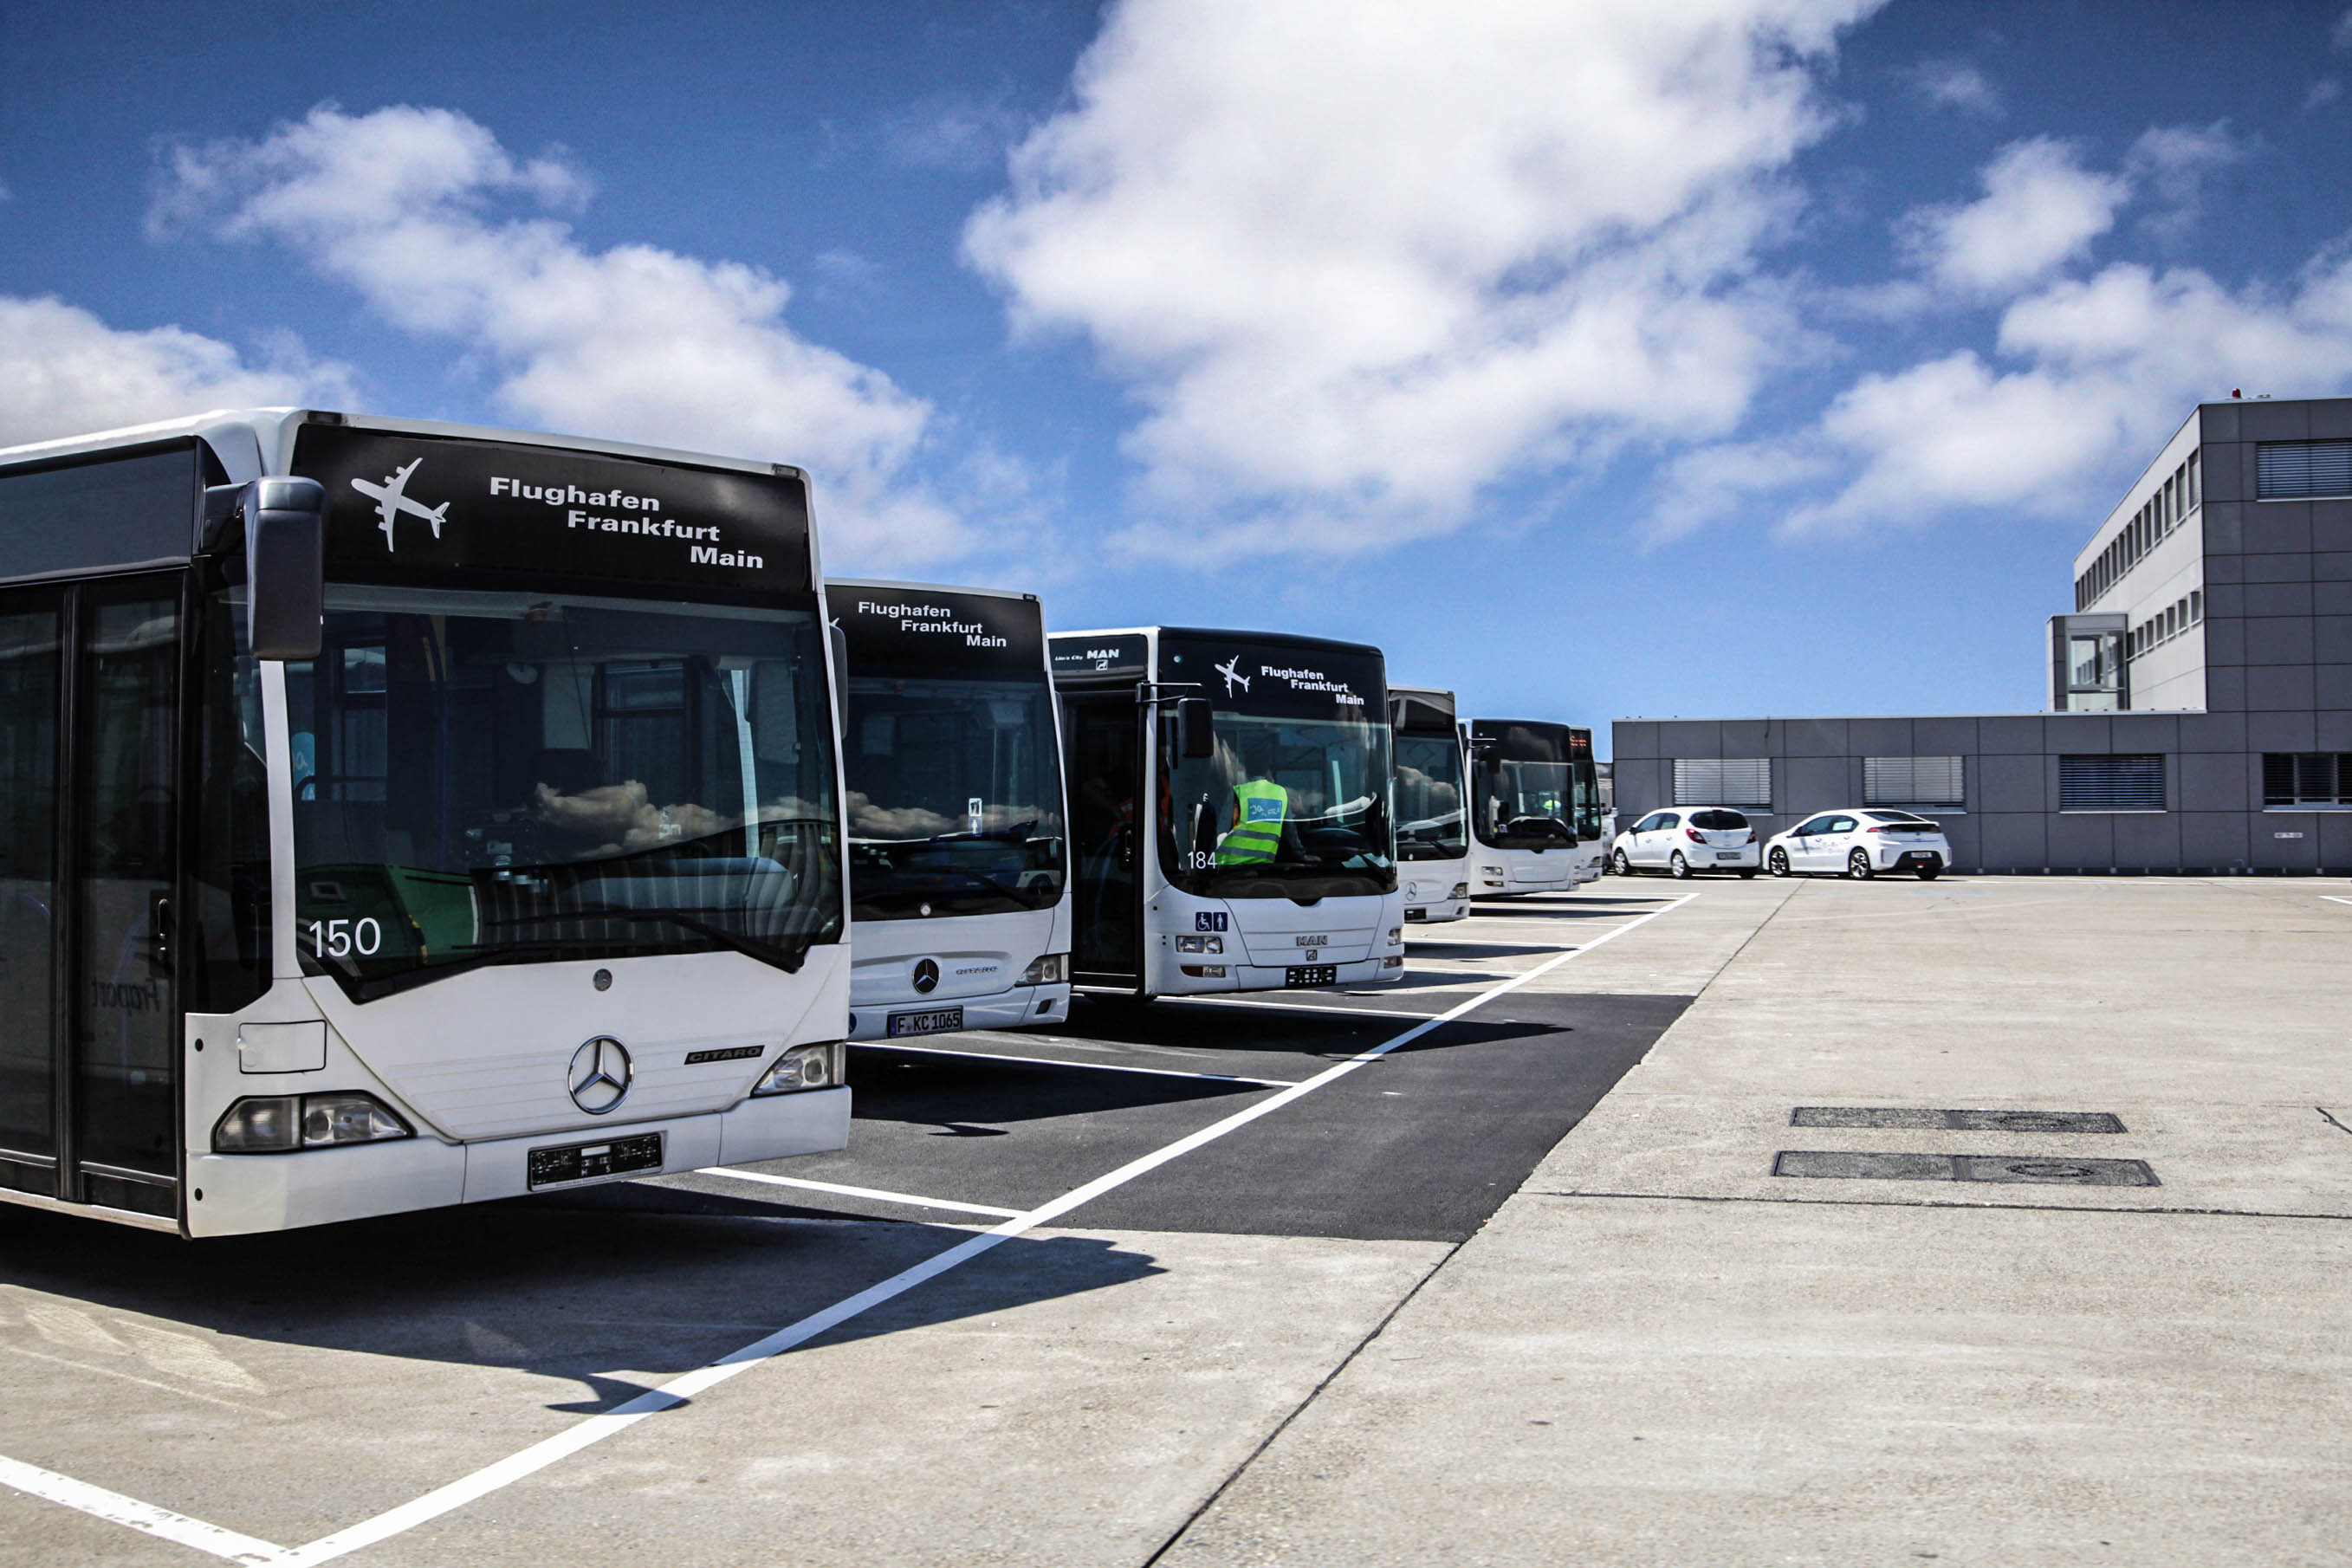 Frankfurt, Germany - August 20, 2015: A row of Mercedes Benz shuttle buses is waiting to be asked to take flight passengers from concorses to external airliner parking positions on the airfield.